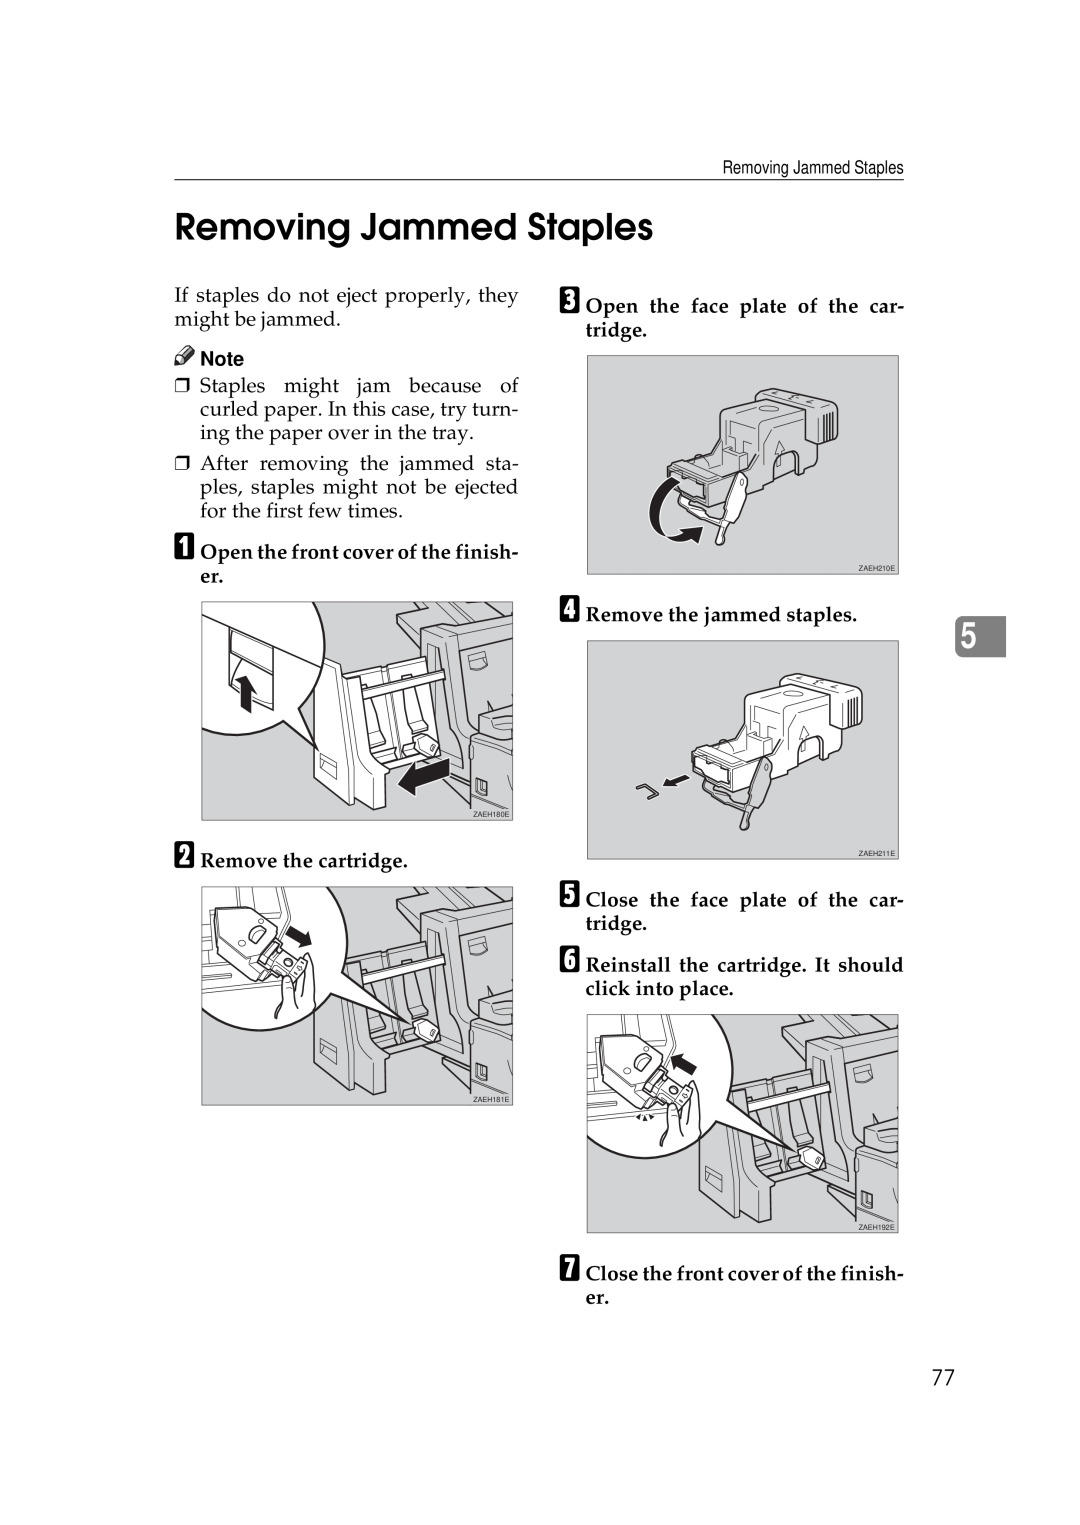 Ricoh Aficio AP2700 operating instructions Removing Jammed Staples 